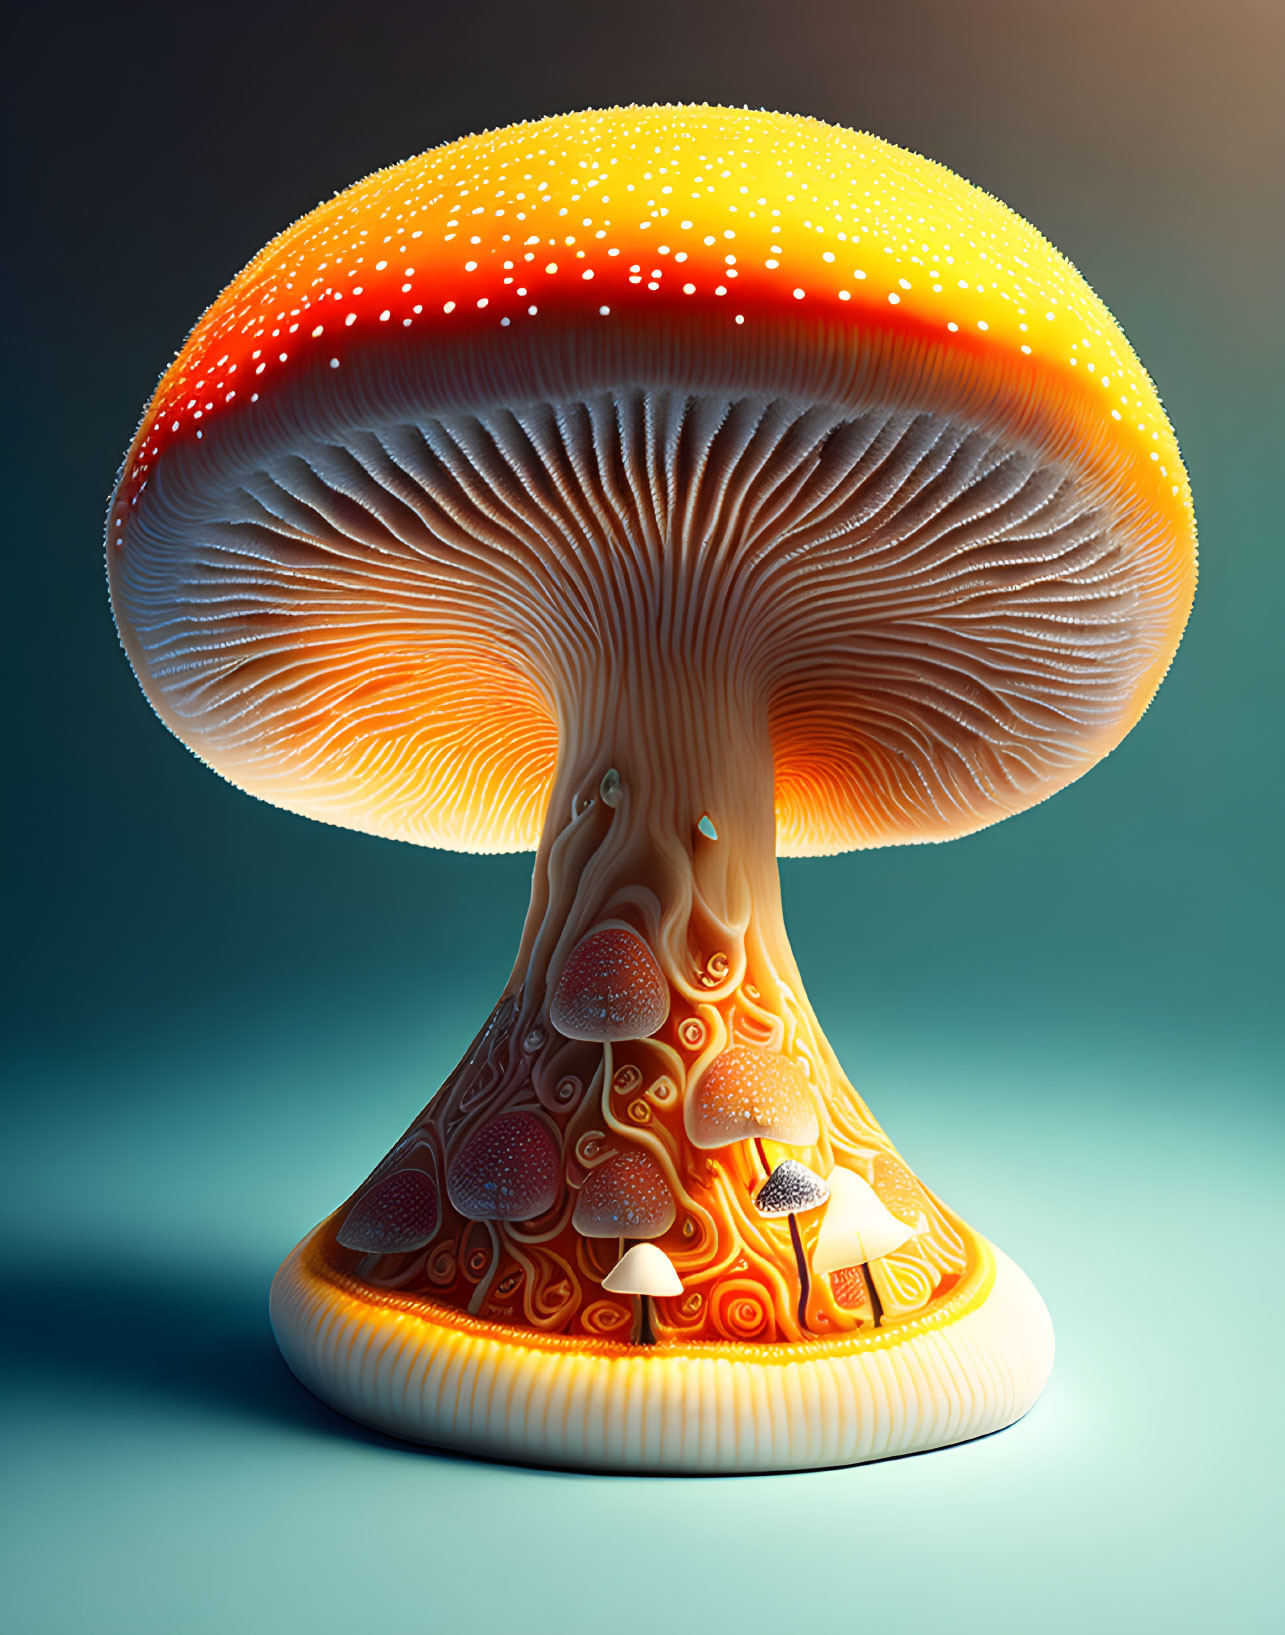 Detailed illustration of glowing mushroom with tiny house and pathway